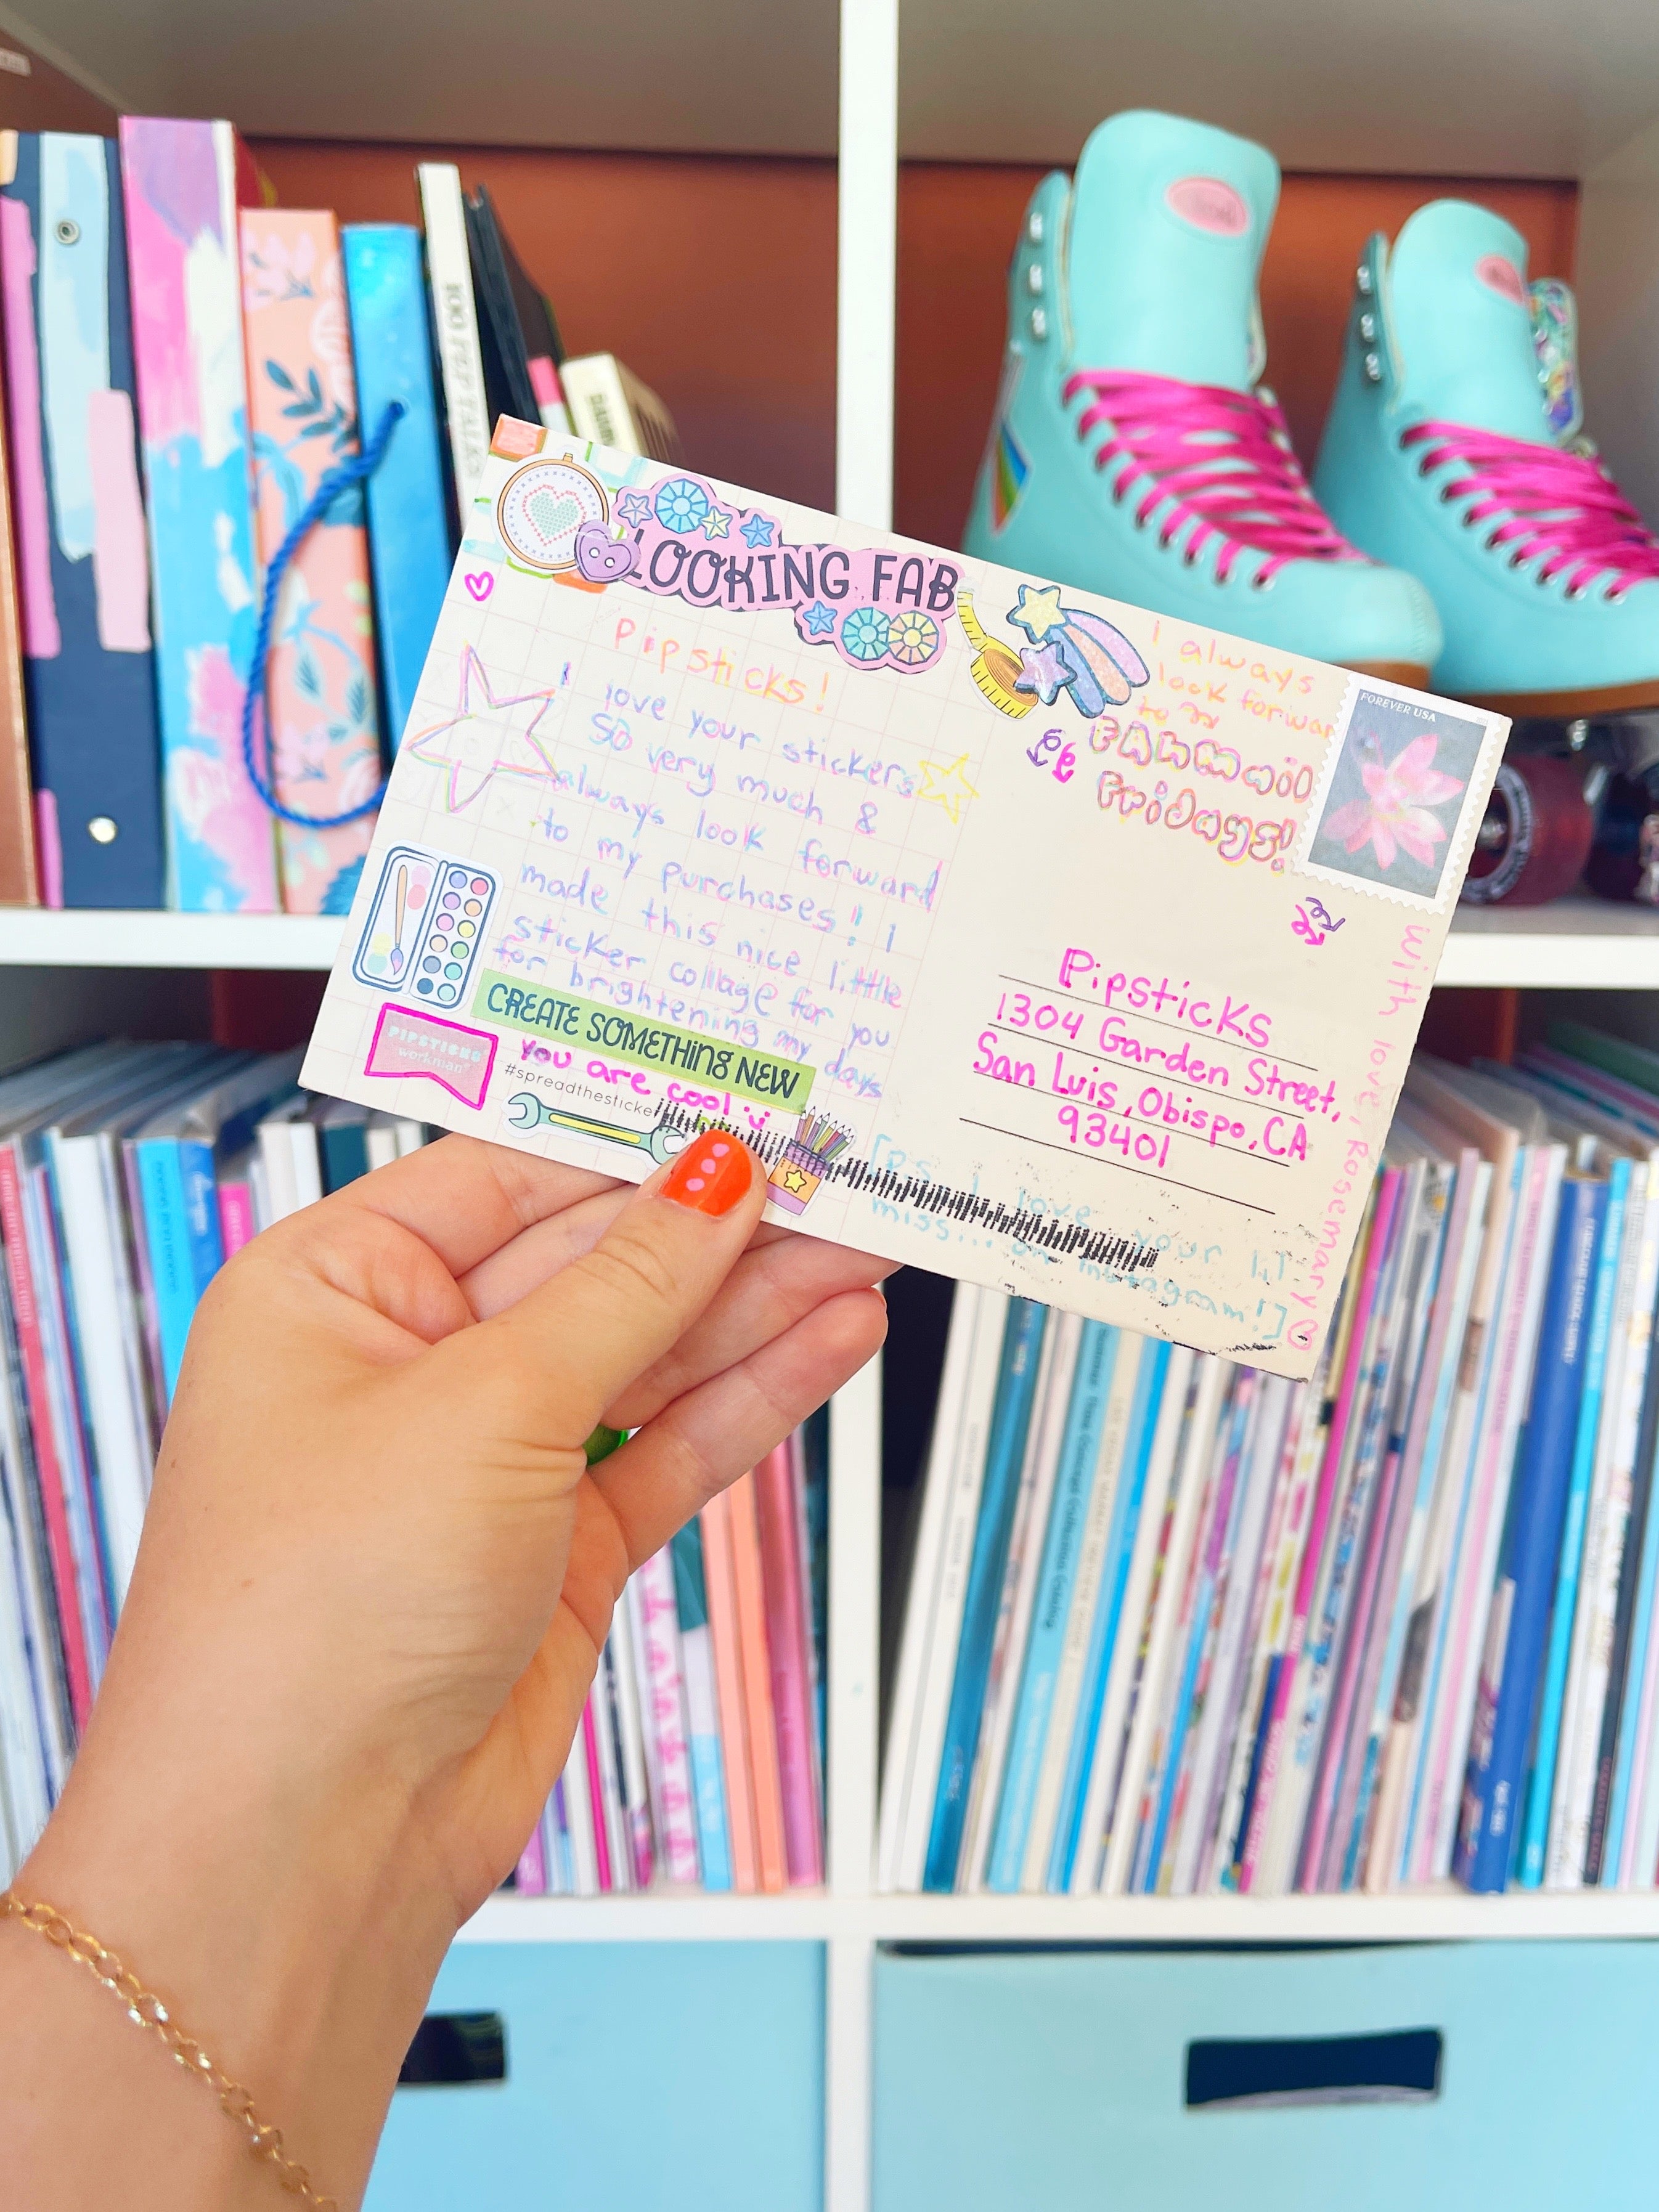 Fanmail Friday: “I always look forward to Fanmail Fridays!”